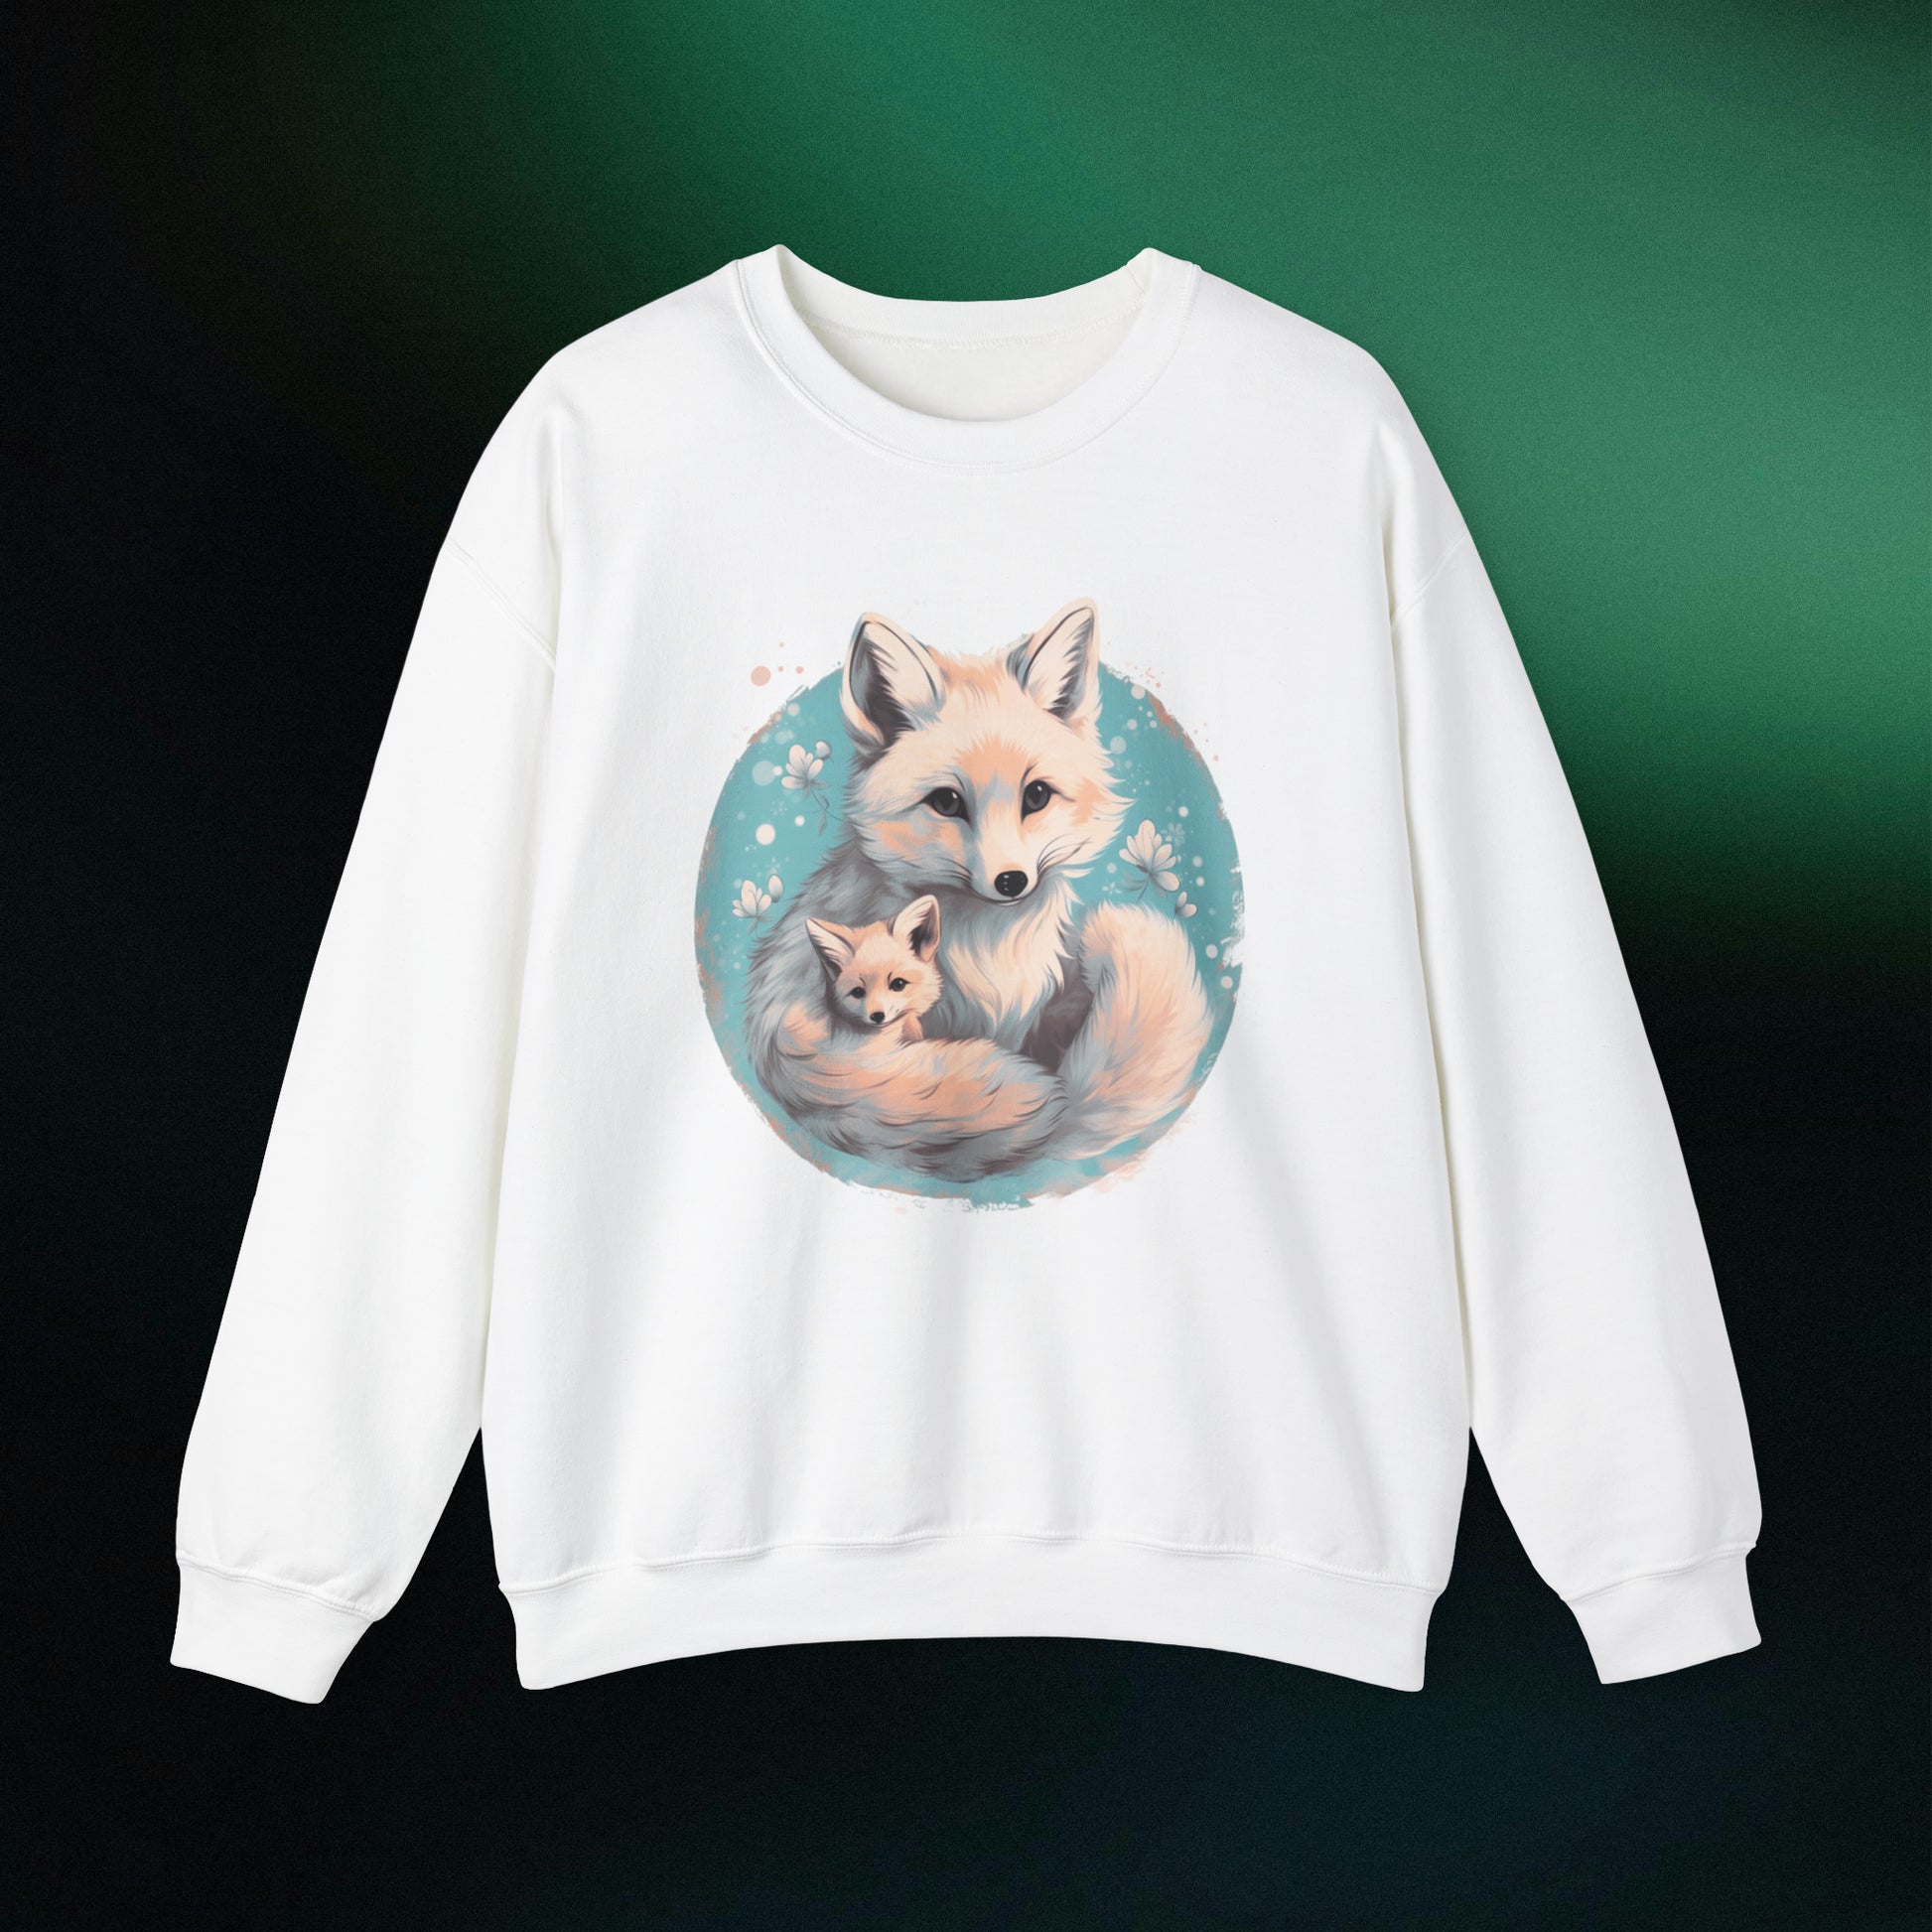 Vintage Forest Witch Aesthetic Sweatshirt - Cozy Fox Cottagecore Sweater with Mommy and Baby Fox Design Sweatshirt S White 